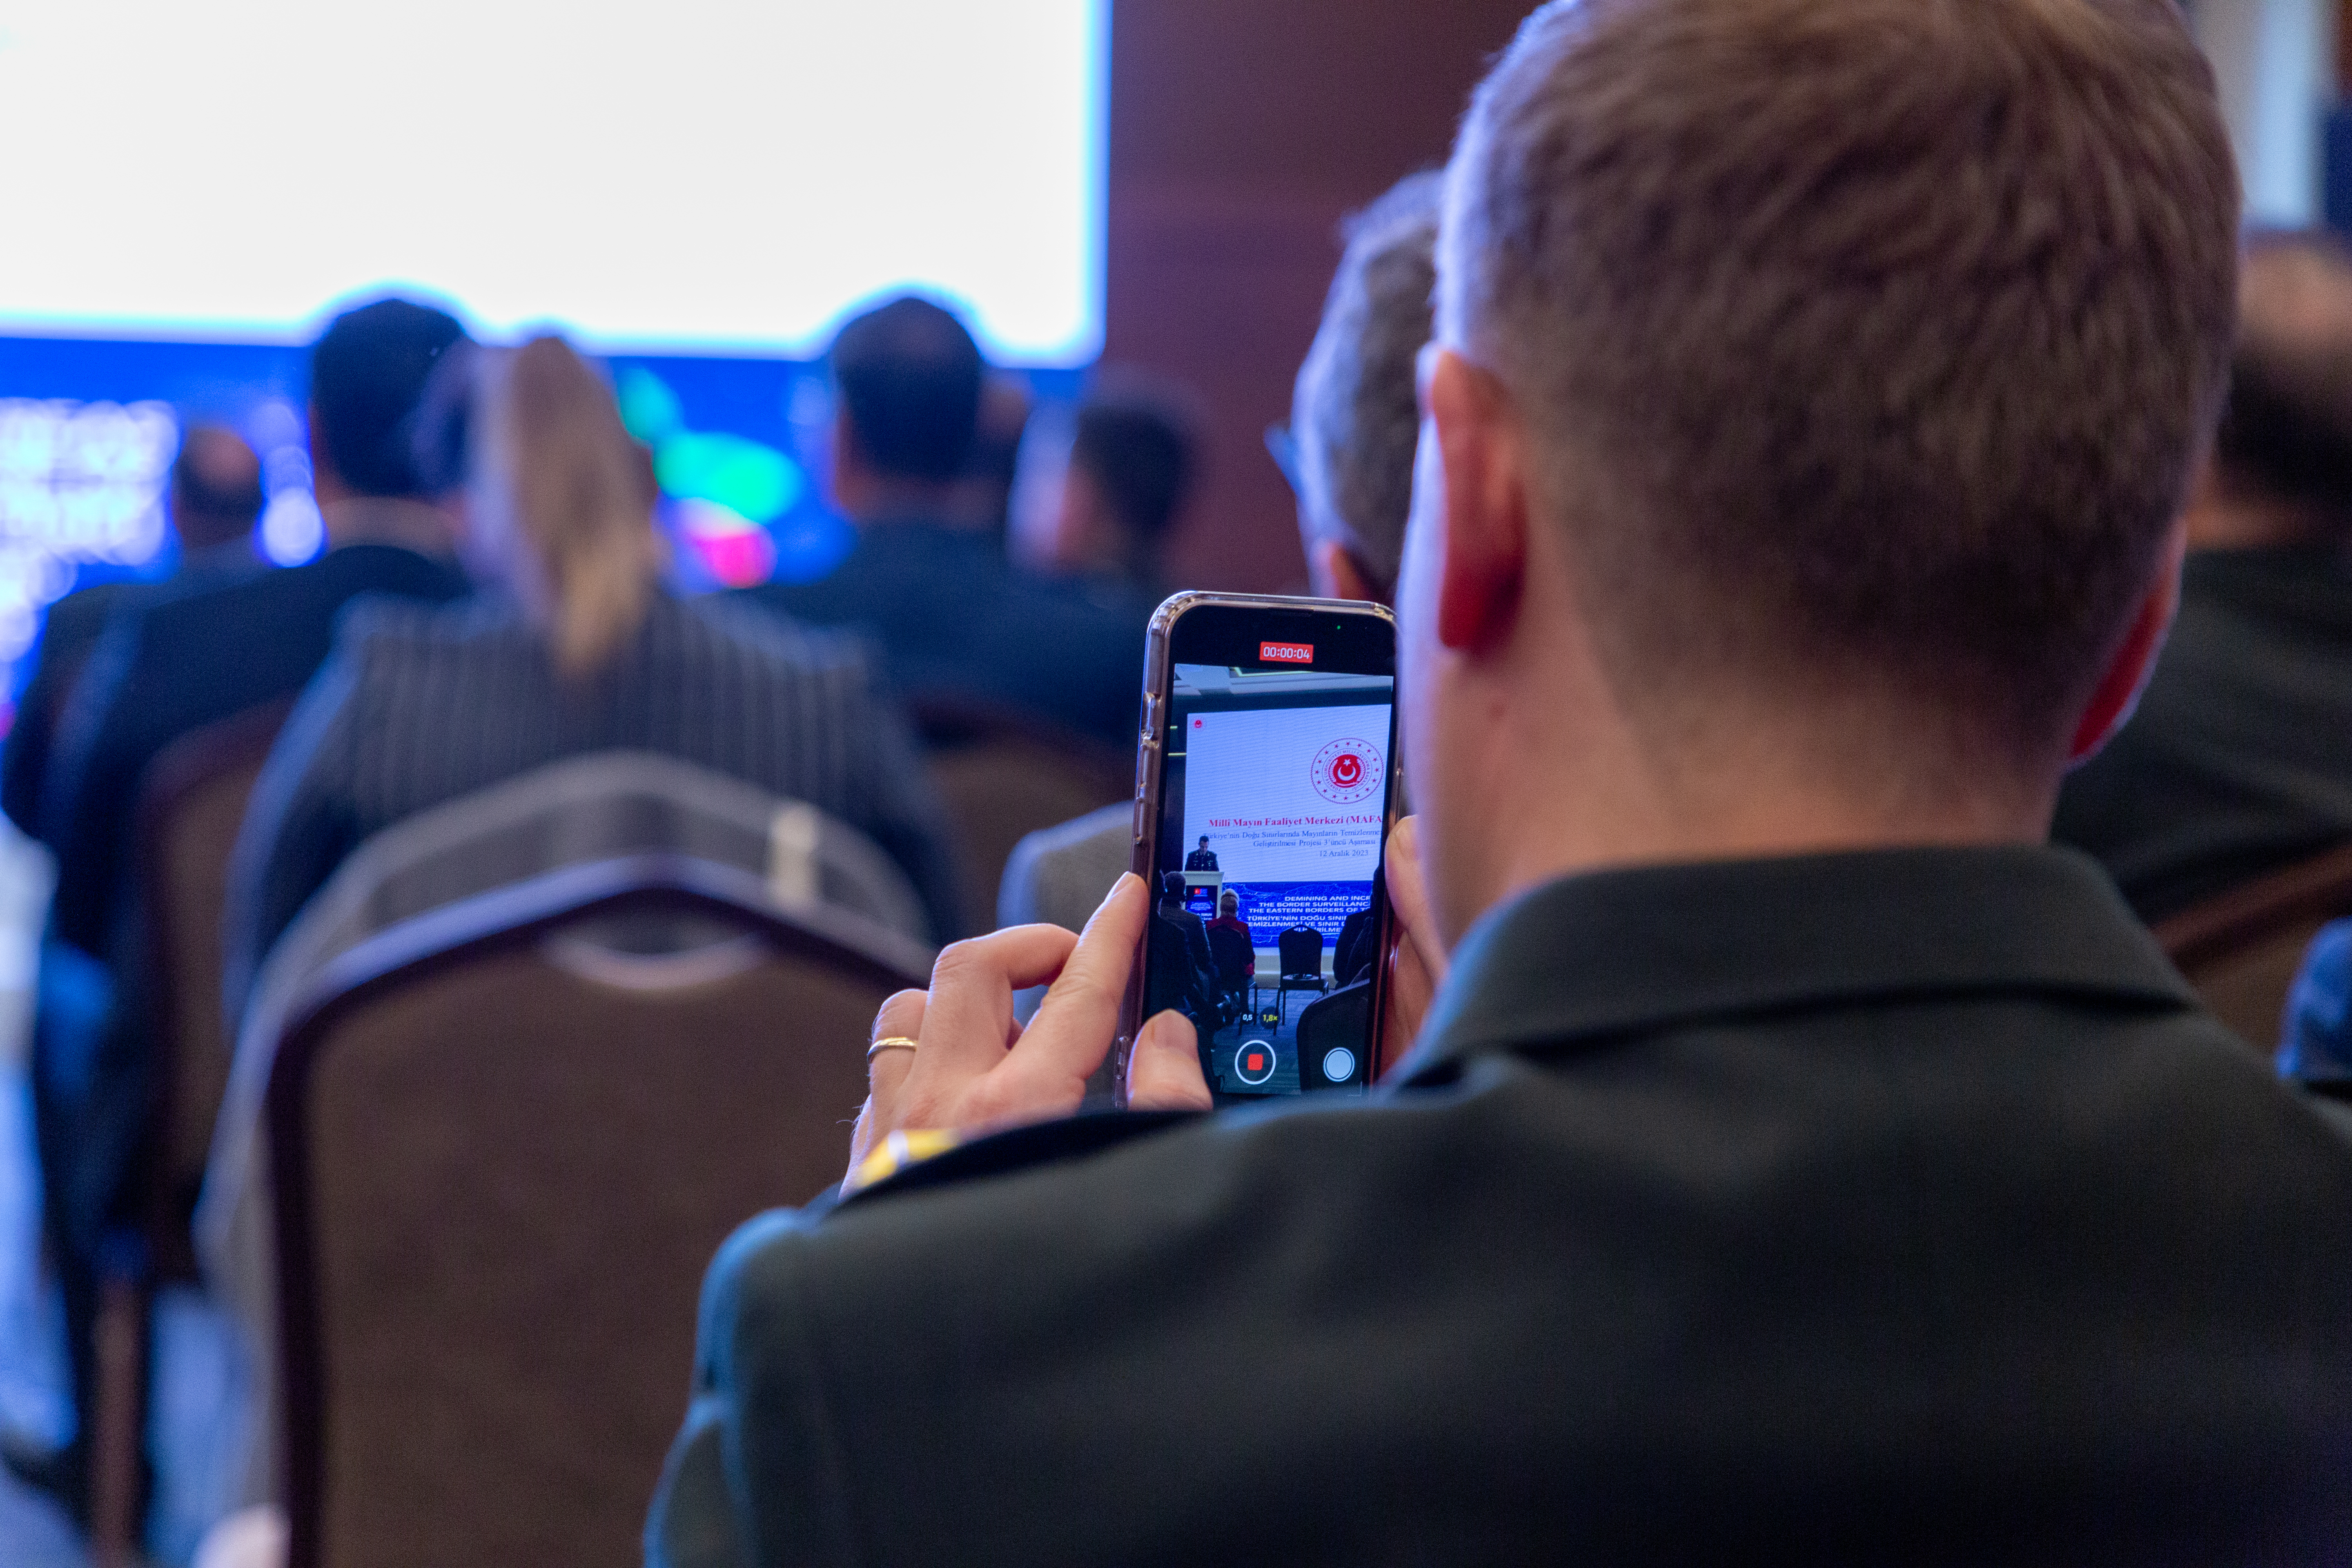 People in a conference room, camera focused on a persons cellphone taking a photo of the stage